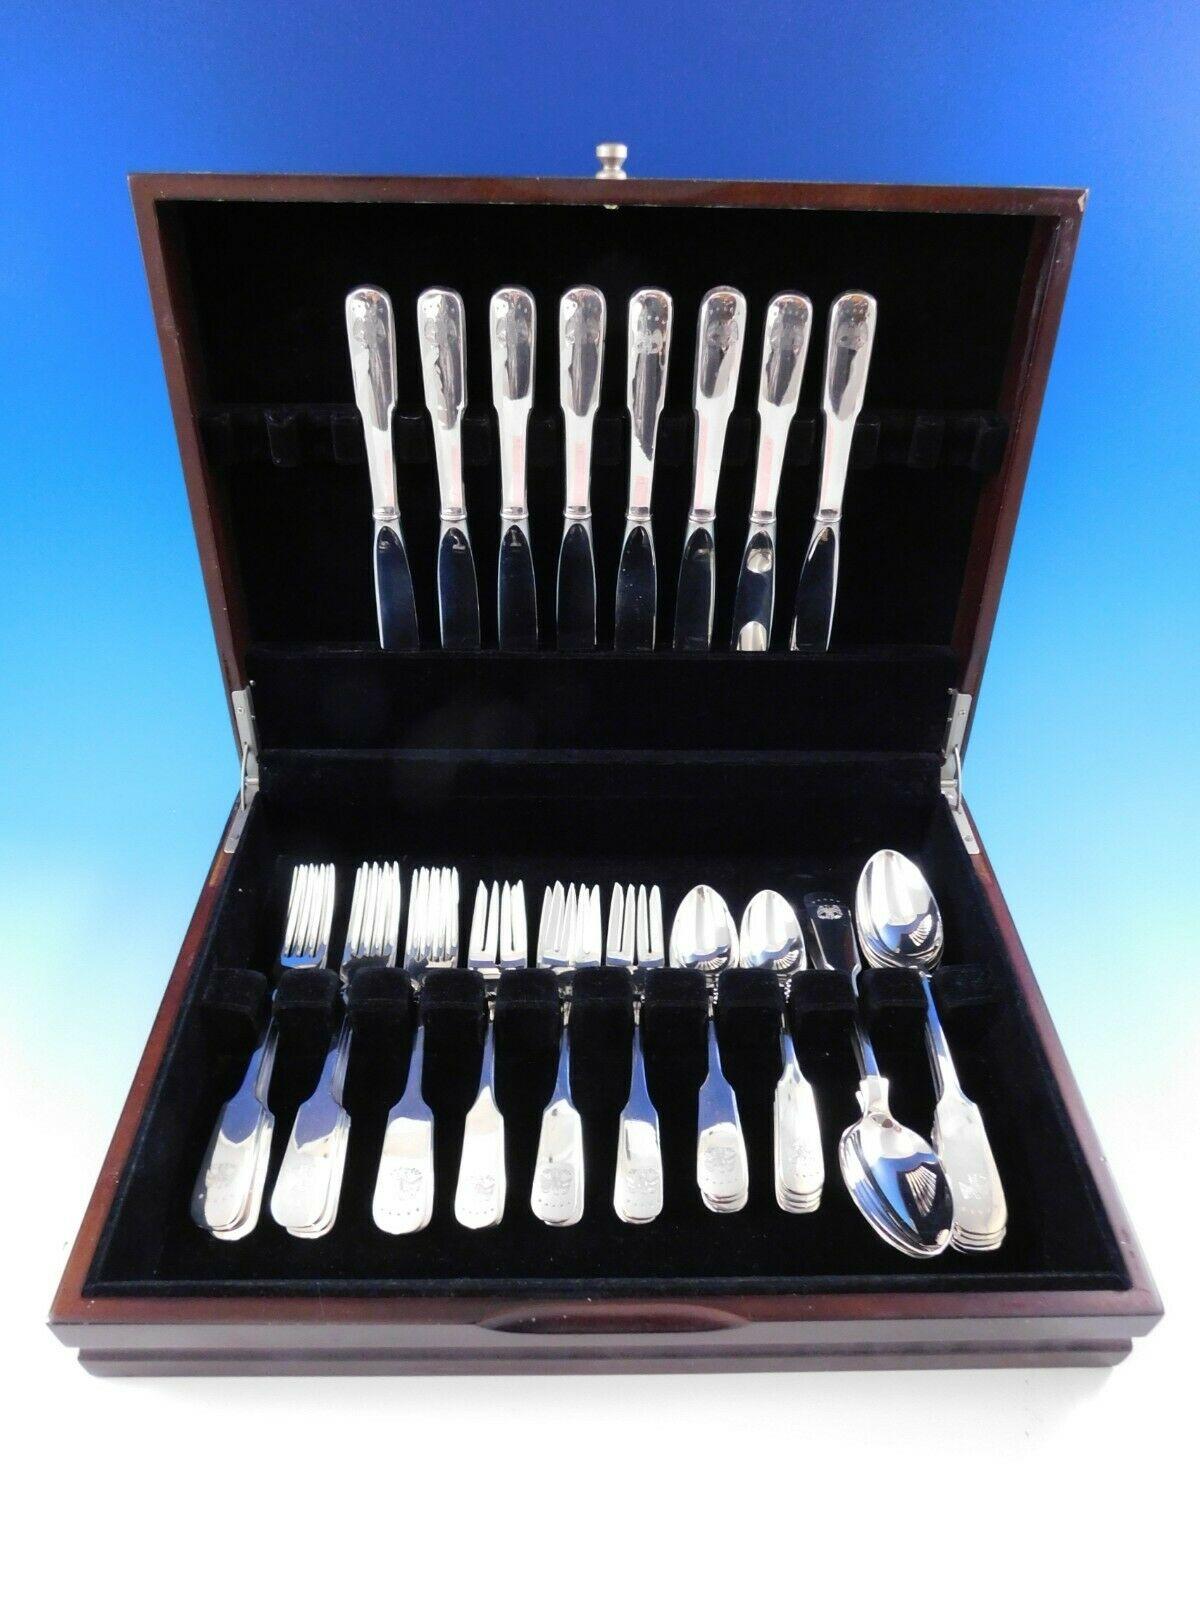 Scarce Colonial eagle by Gorham sterling silver flatware set, 40 pieces. This set includes:

8 knives, 8 3/4